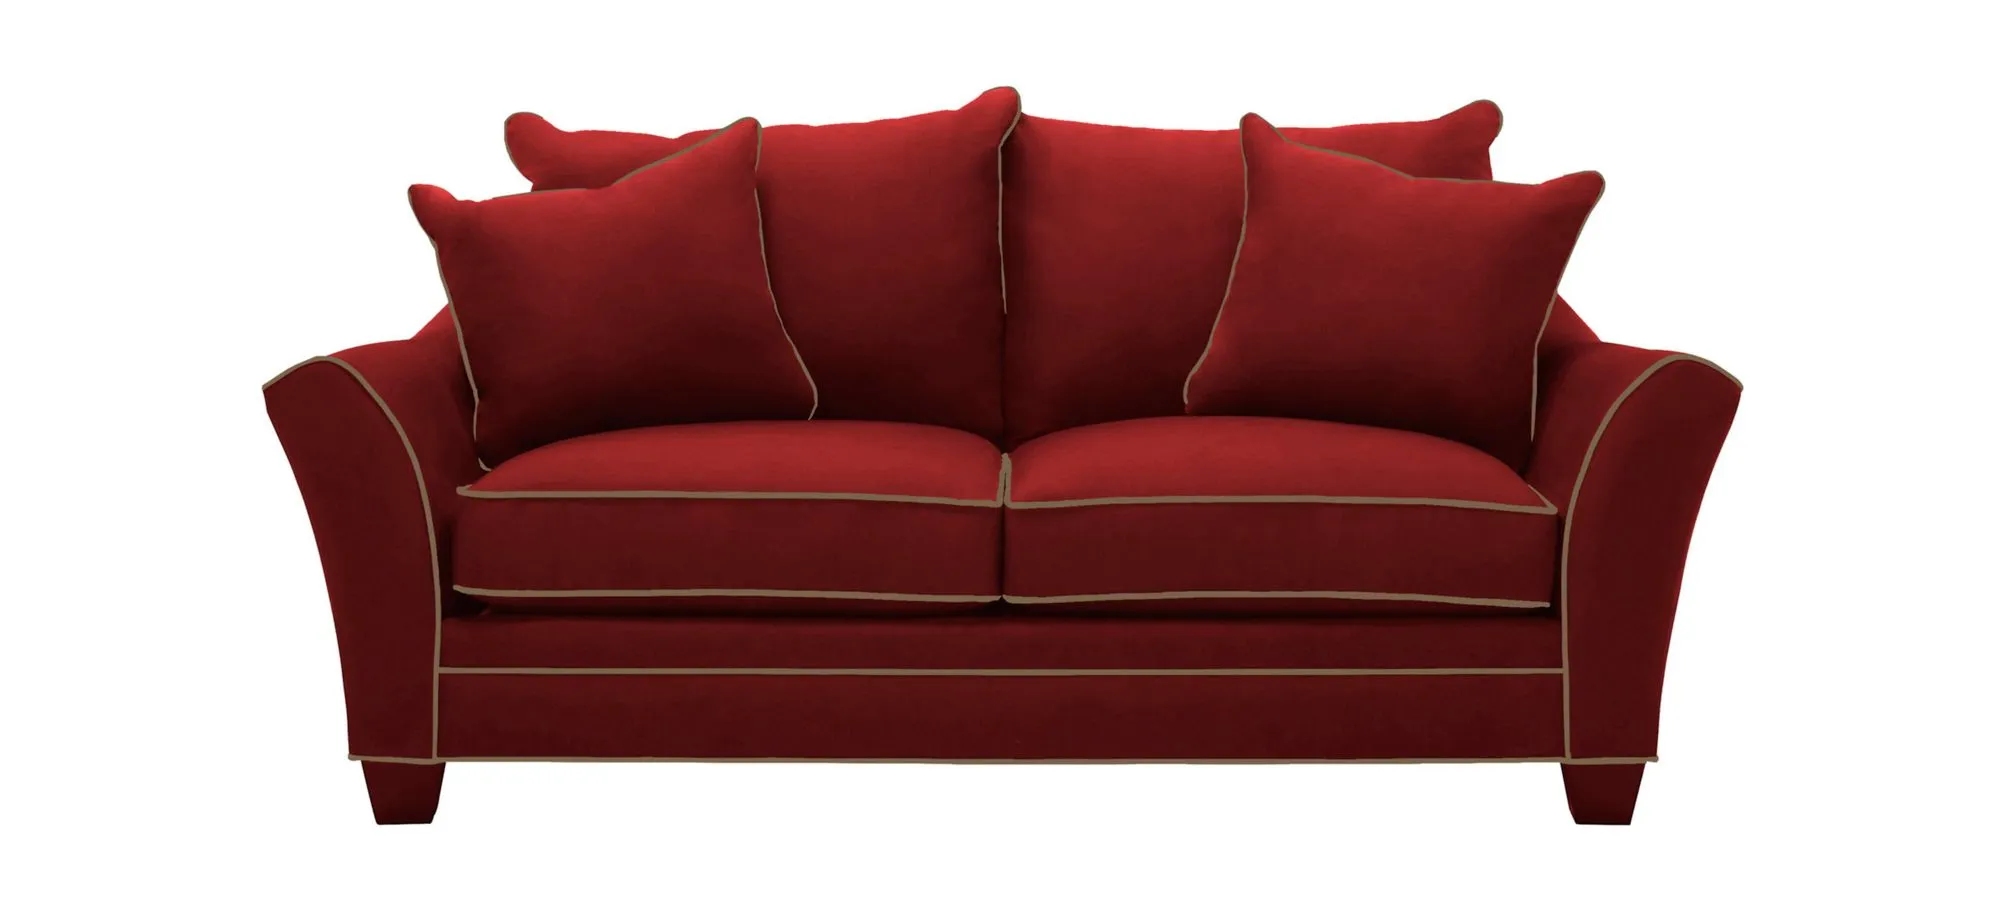 Briarwood Apartment Sofa in Suede So Soft Cardinal/Mineral by H.M. Richards